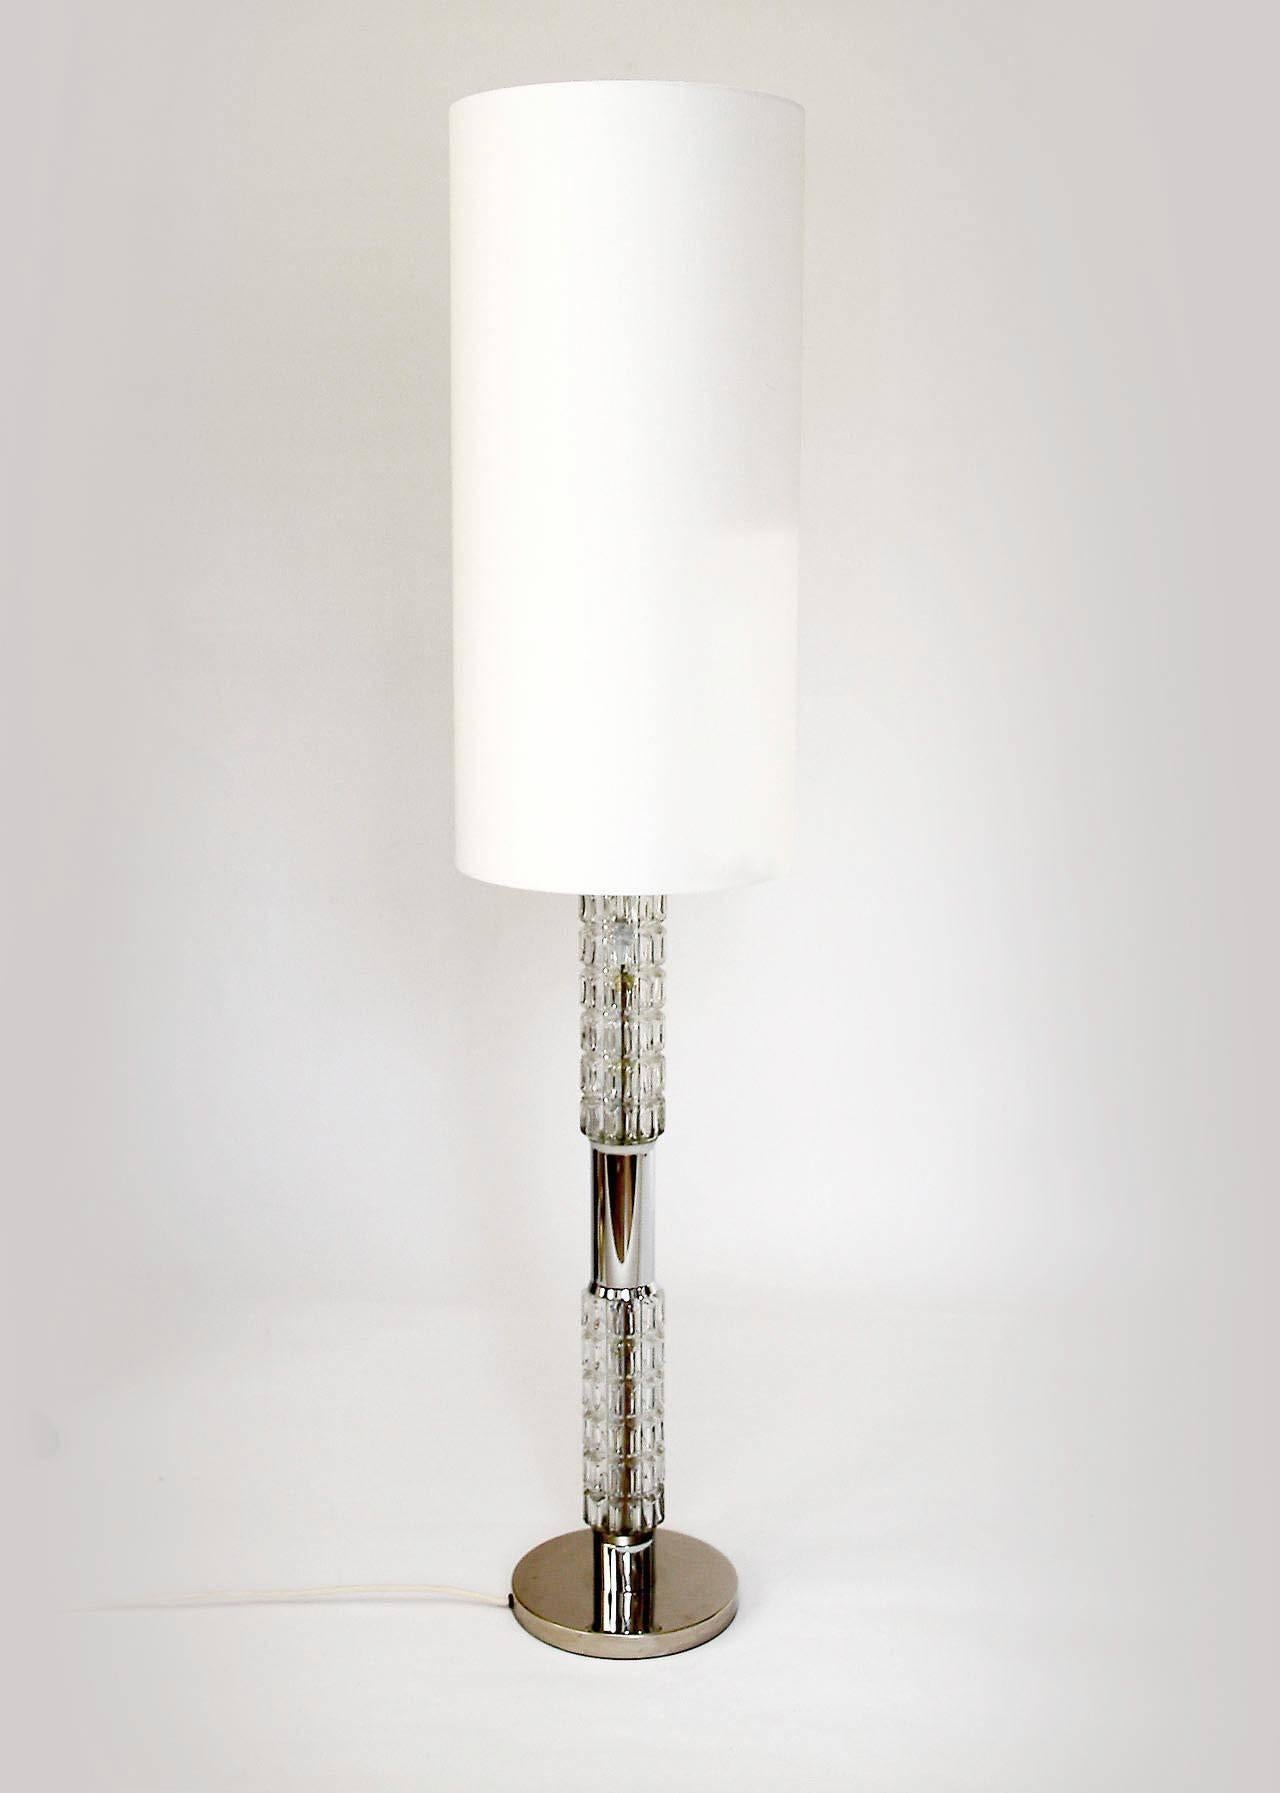 A stunning chrome and structured glass floor or table lamp by Richard Essig, Besigheim, Germany, manufactured in Mid-Century, circa 1970. 

This light has a very nice feature:
There are three bulbs which can be switched on in three different ways